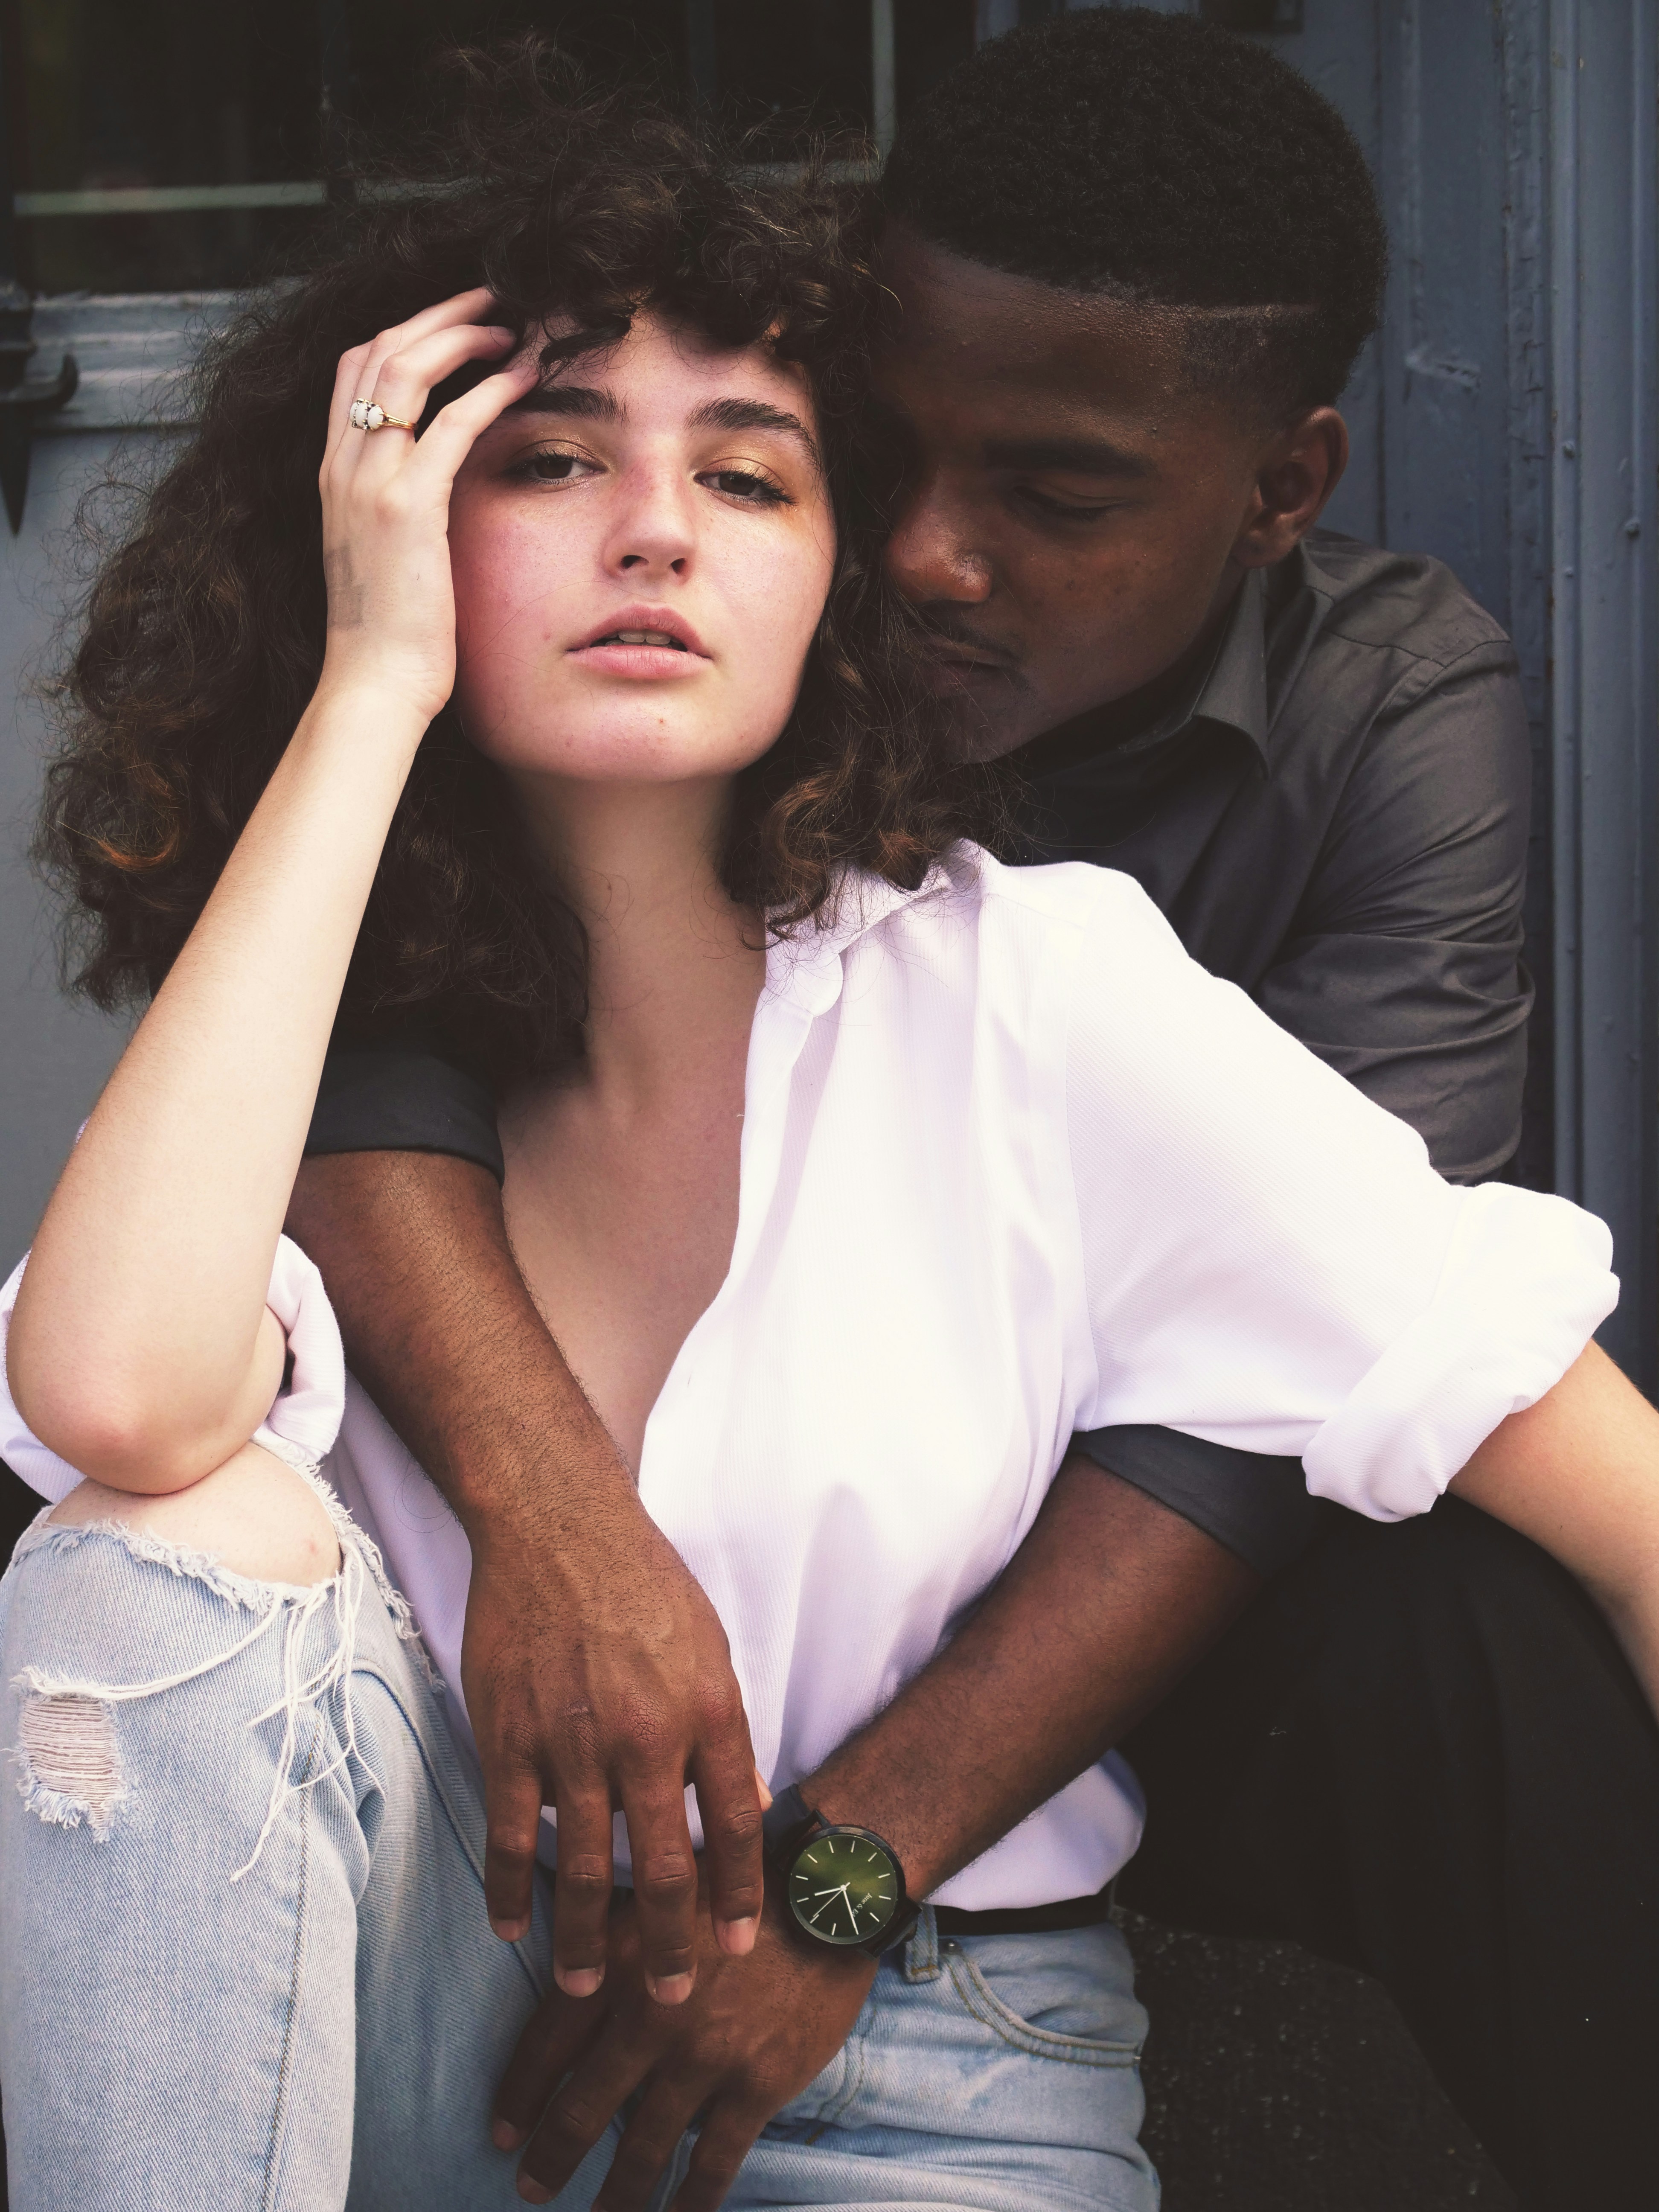 500+ Interracial Couple Pictures HD Download Free Images on Unsplash pic image